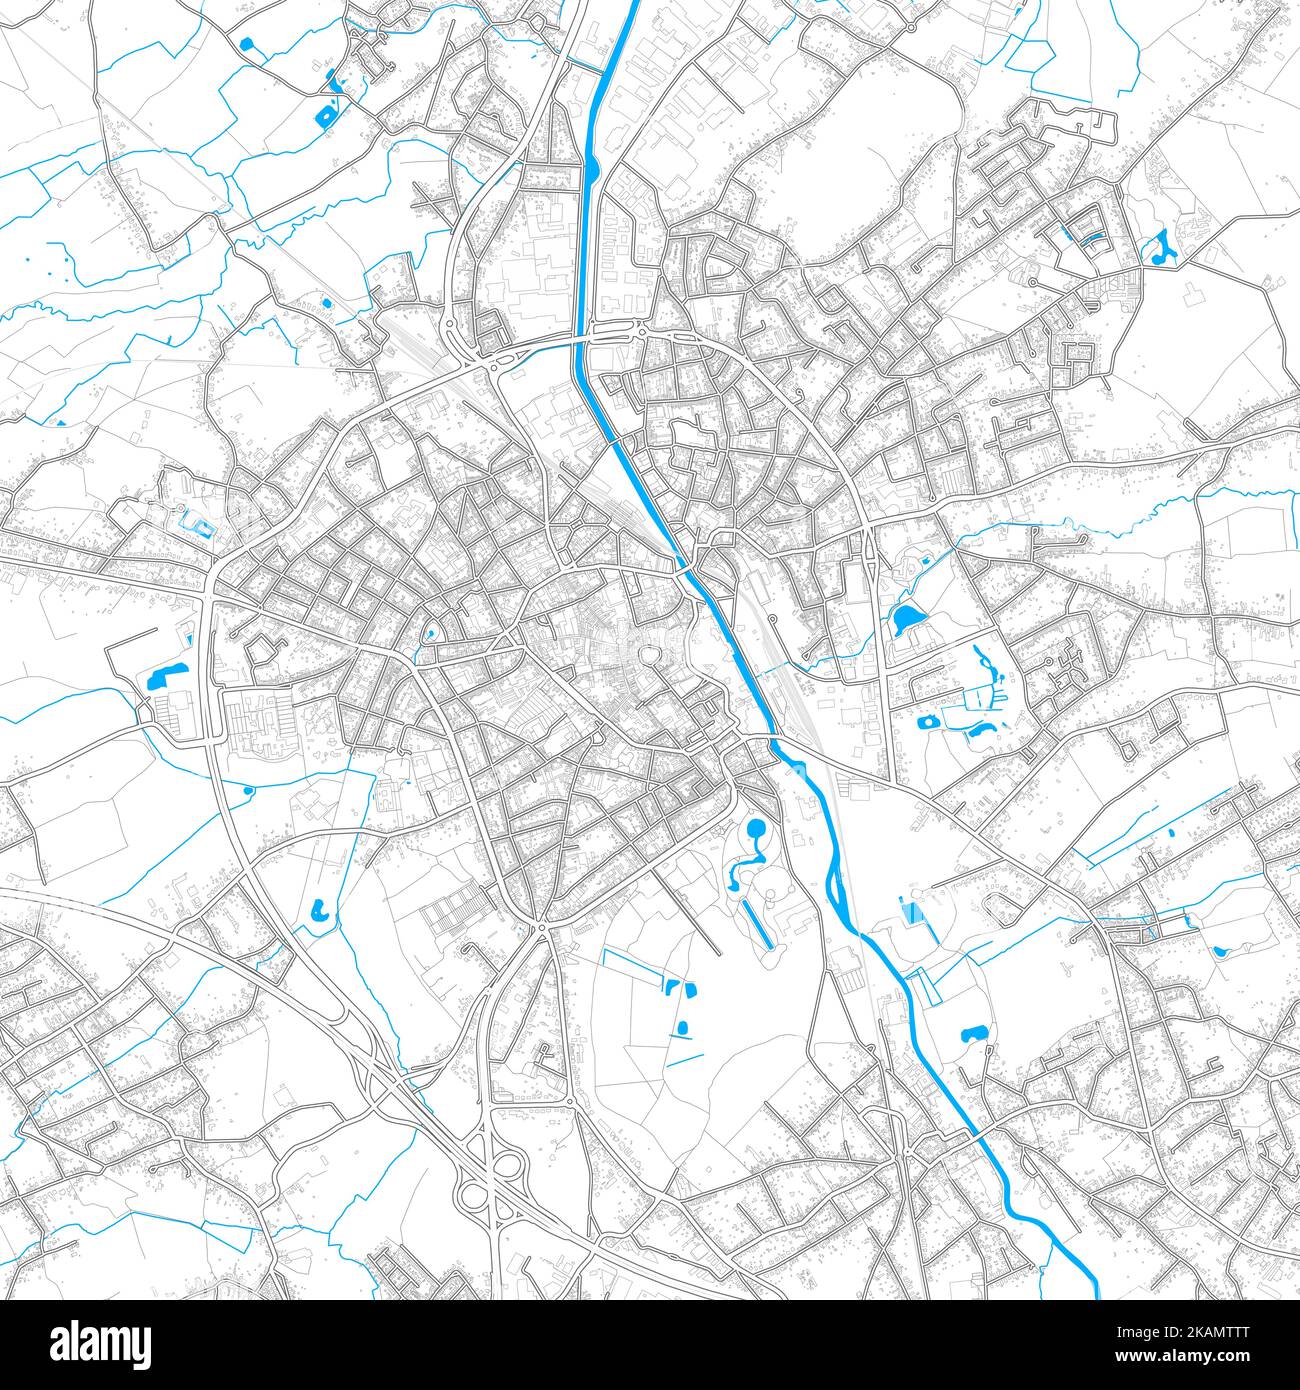 Aalst, East Flanders, Belgium high resolution vector map with editable paths. Bright outlines for main roads. Use it for any printed and digital backg Stock Vector